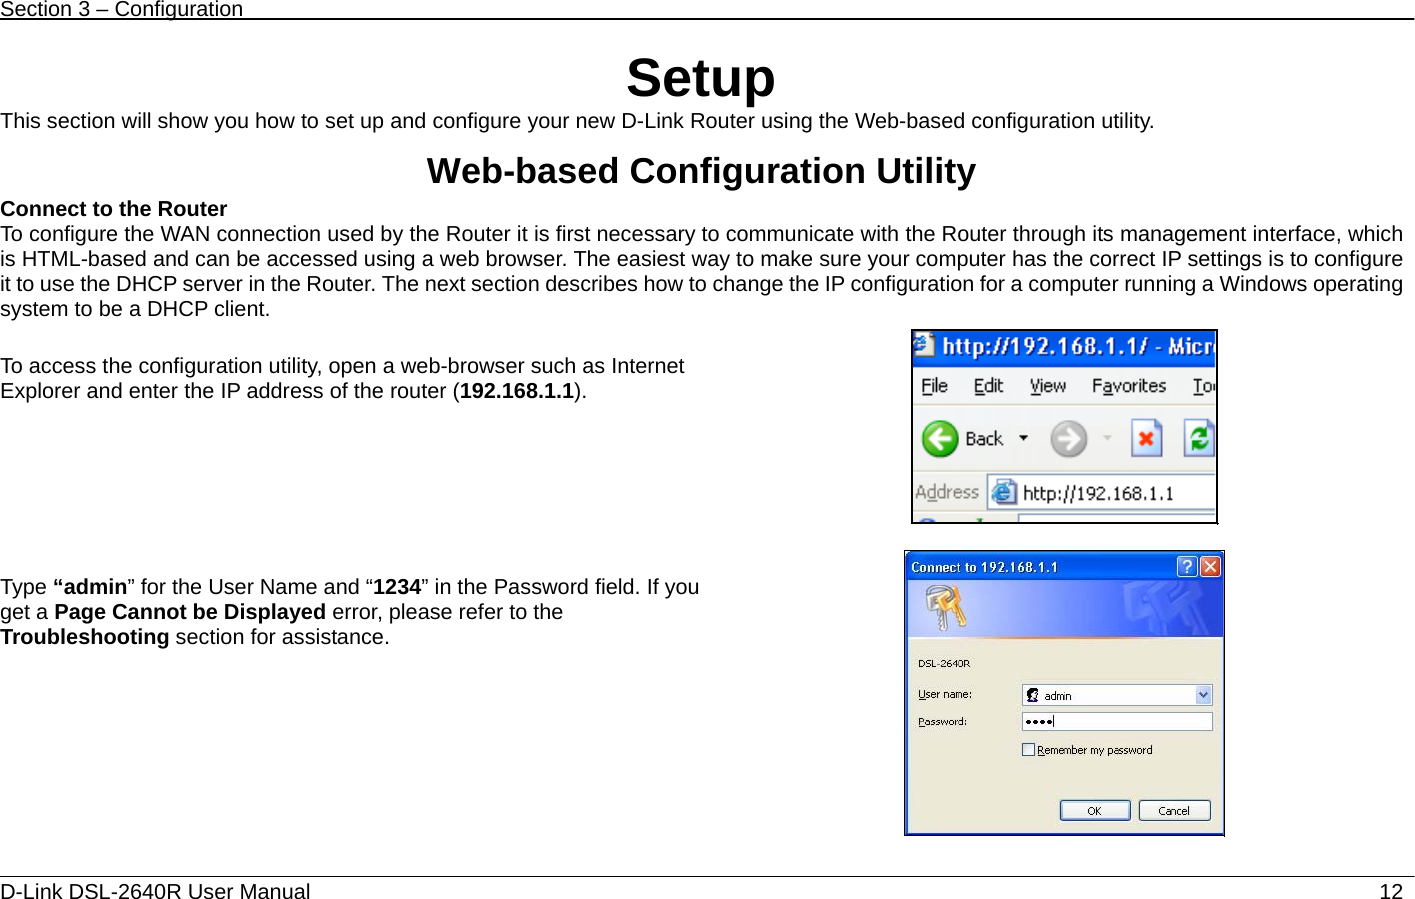 Section 3 – Configuration   D-Link DSL-2640R User Manual                           12Setup This section will show you how to set up and configure your new D-Link Router using the Web-based configuration utility.  Web-based Configuration Utility Connect to the Router   To configure the WAN connection used by the Router it is first necessary to communicate with the Router through its management interface, which is HTML-based and can be accessed using a web browser. The easiest way to make sure your computer has the correct IP settings is to configure it to use the DHCP server in the Router. The next section describes how to change the IP configuration for a computer running a Windows operating system to be a DHCP client.  To access the configuration utility, open a web-browser such as Internet Explorer and enter the IP address of the router (192.168.1.1).      Type “admin” for the User Name and “1234” in the Password field. If you get a Page Cannot be Displayed error, please refer to the Troubleshooting section for assistance.  